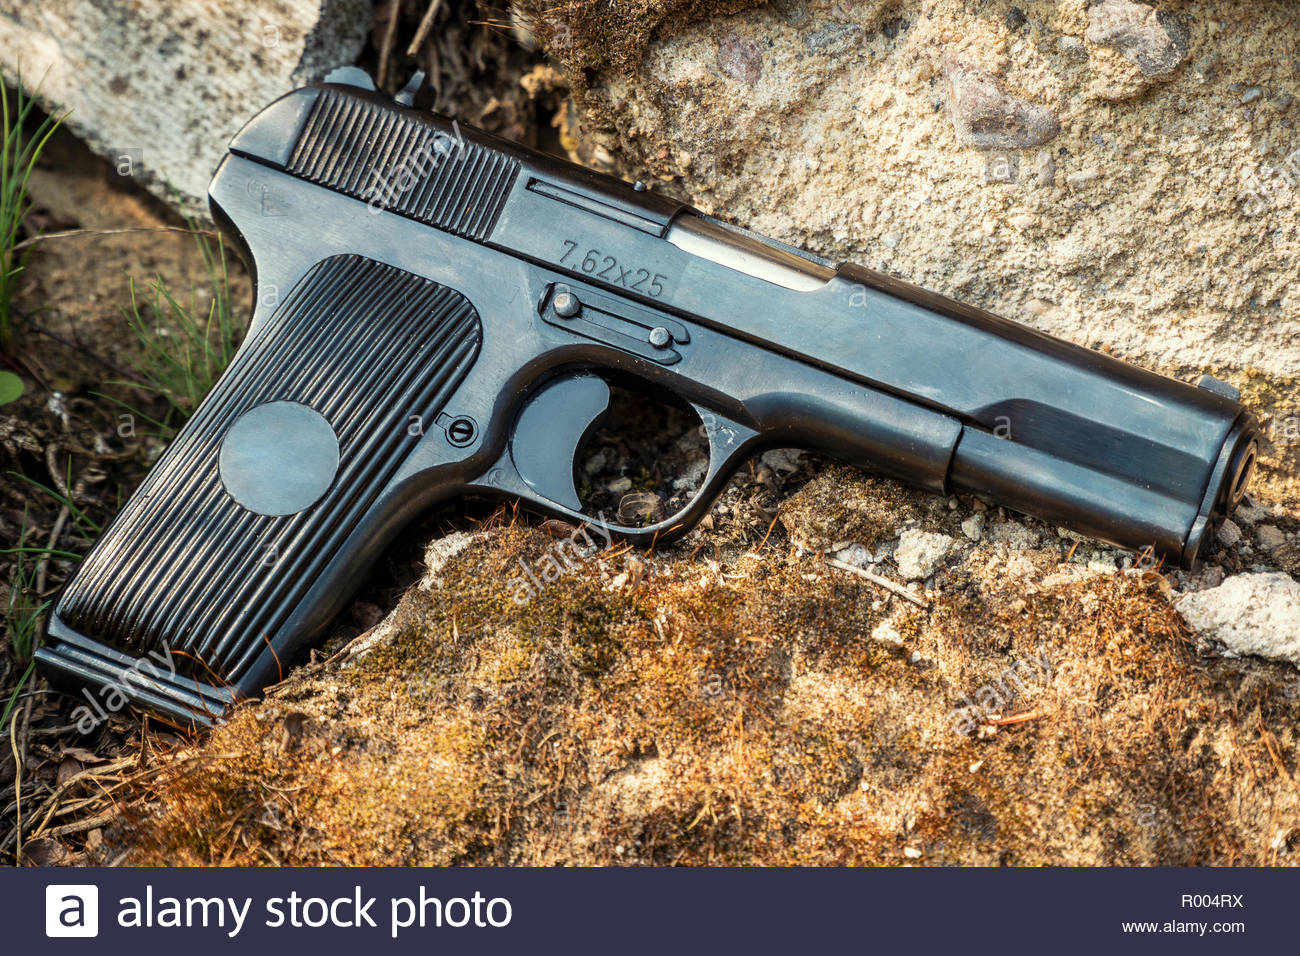 Black 9mm Pistol On A Background Of Stones And Moss Stock Photo